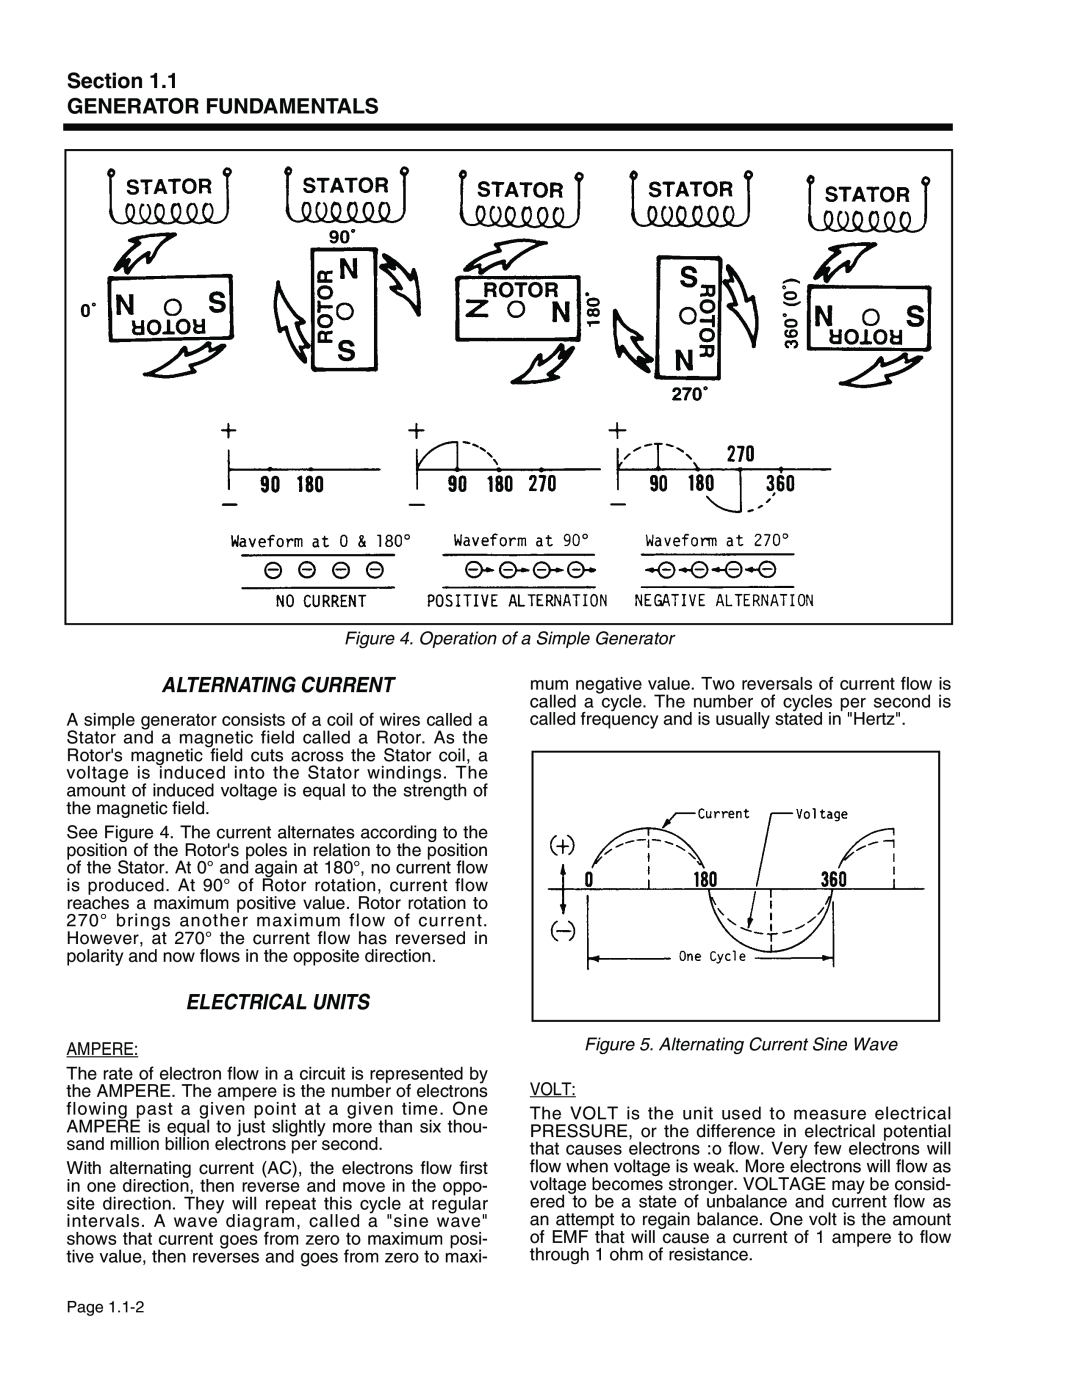 Generac Power Systems 940-2, 941-2 service manual Alternating Current, Electrical Units, Operation of a Simple Generator 